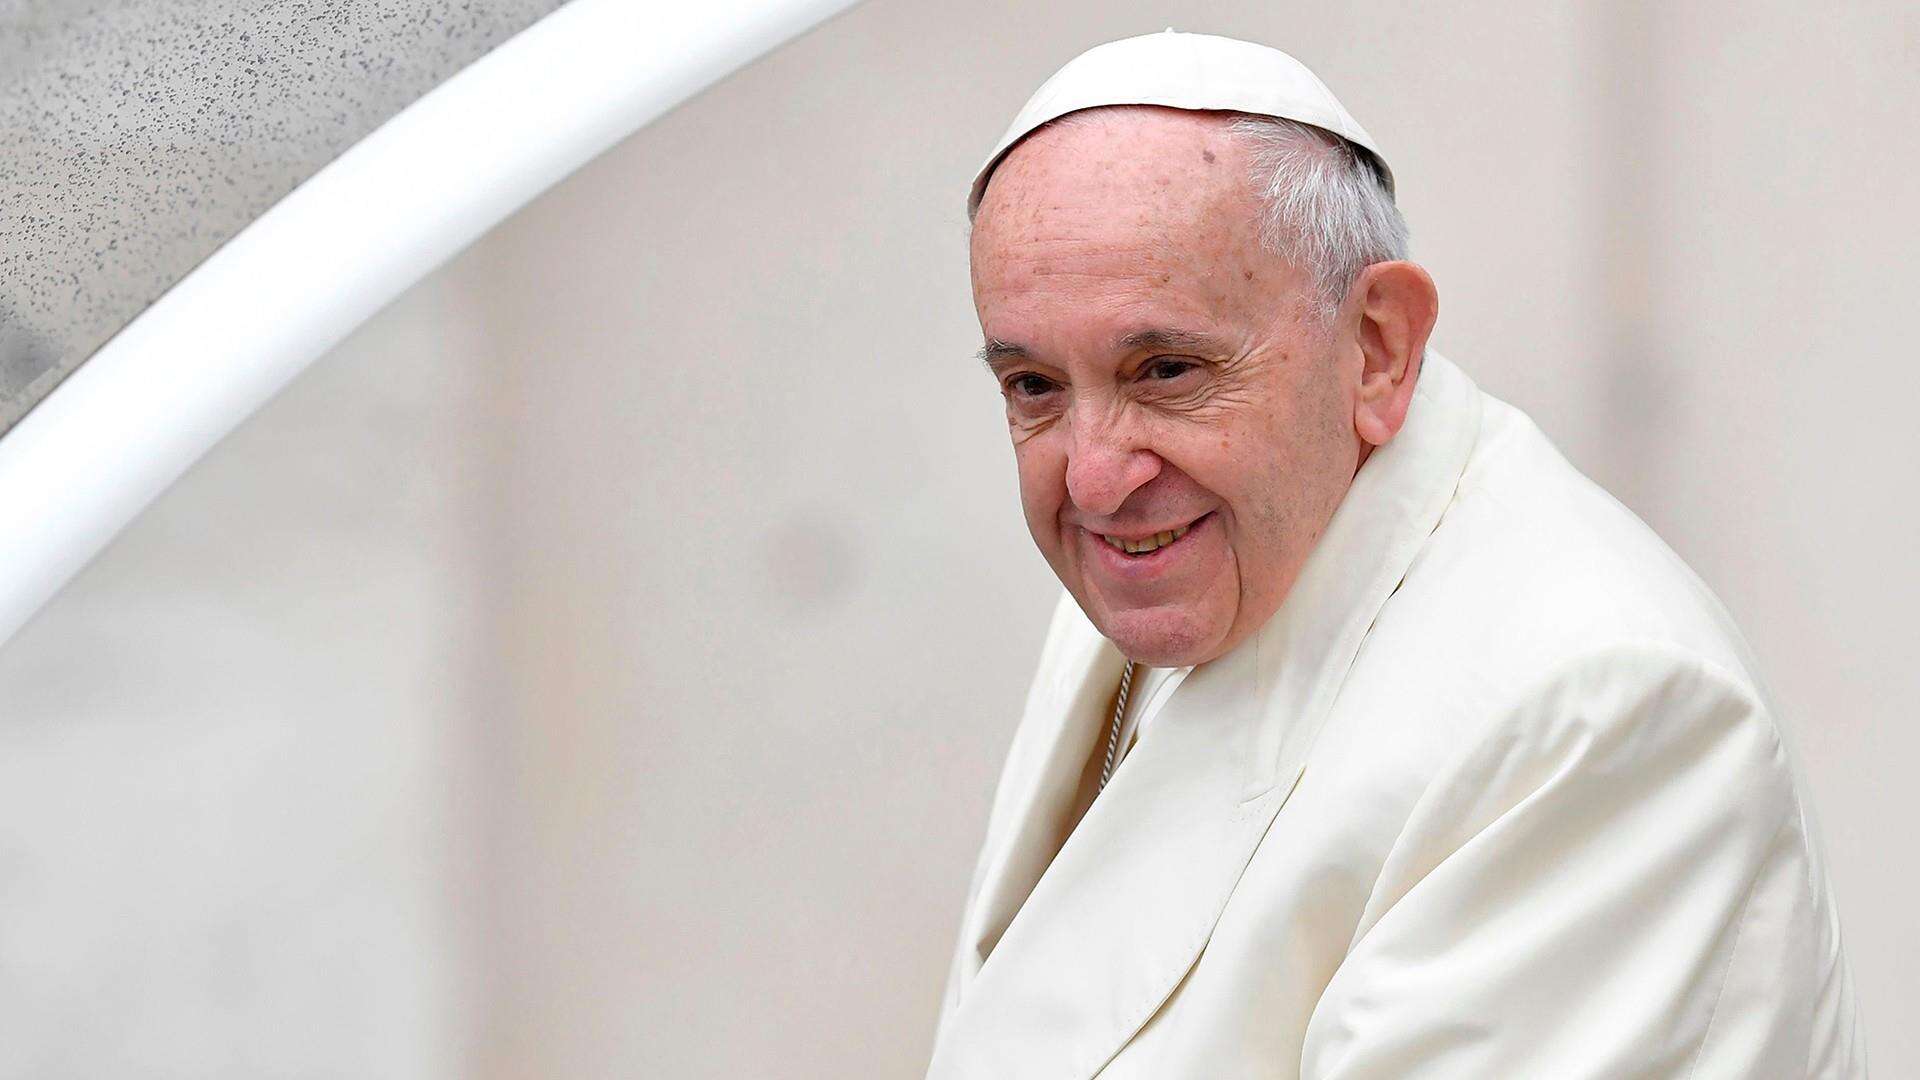 Pope Francis returns to Vatican city following hospital visit